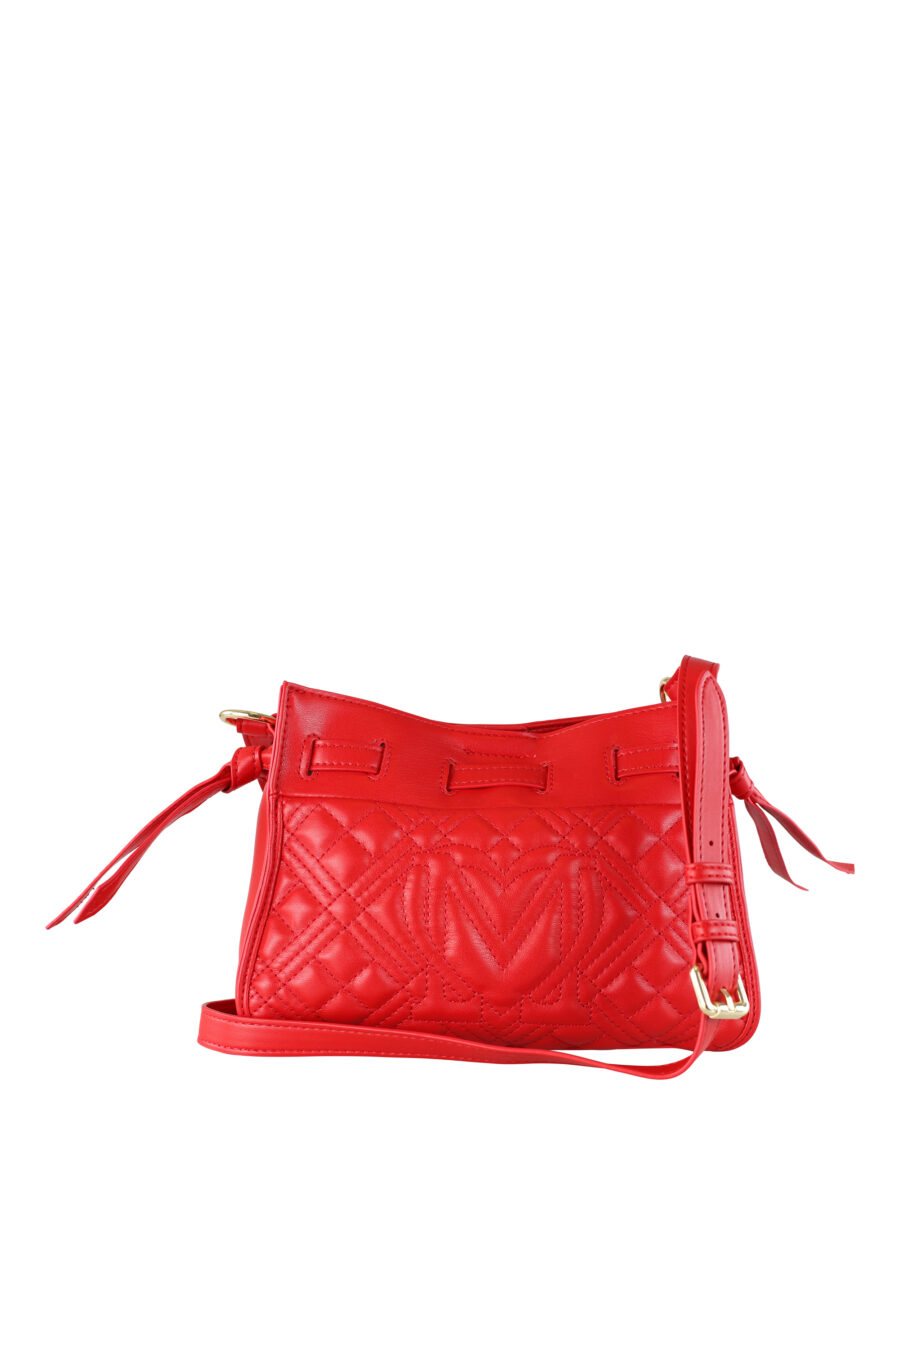 Red quilted shoulder bag with chain and logo - IMG 0387